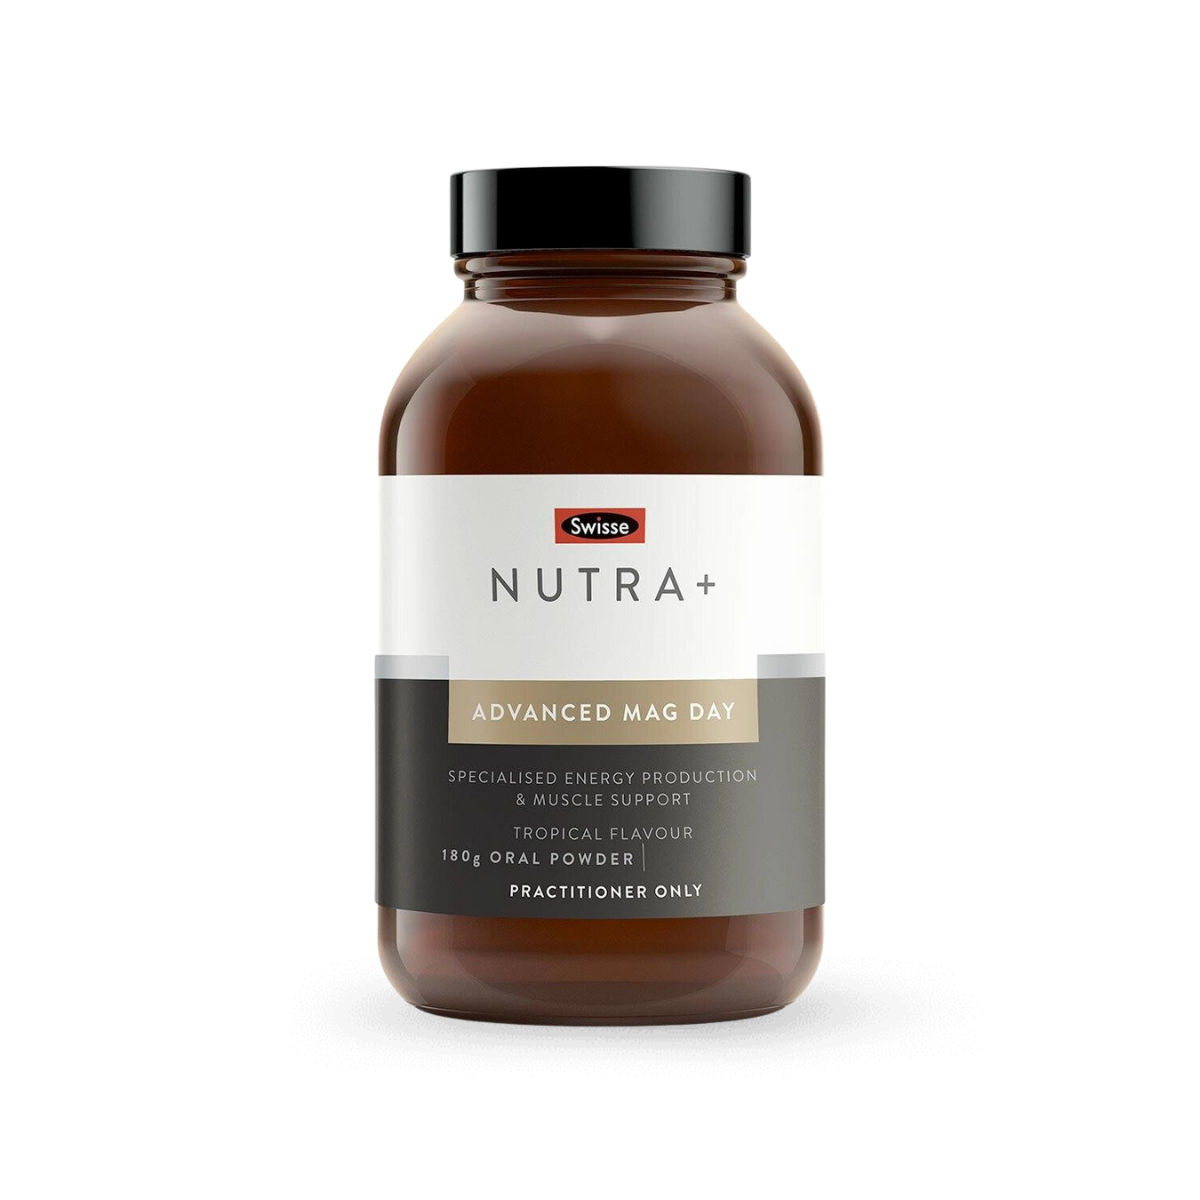 Swisse Nutra Advanced Mag Day 180g